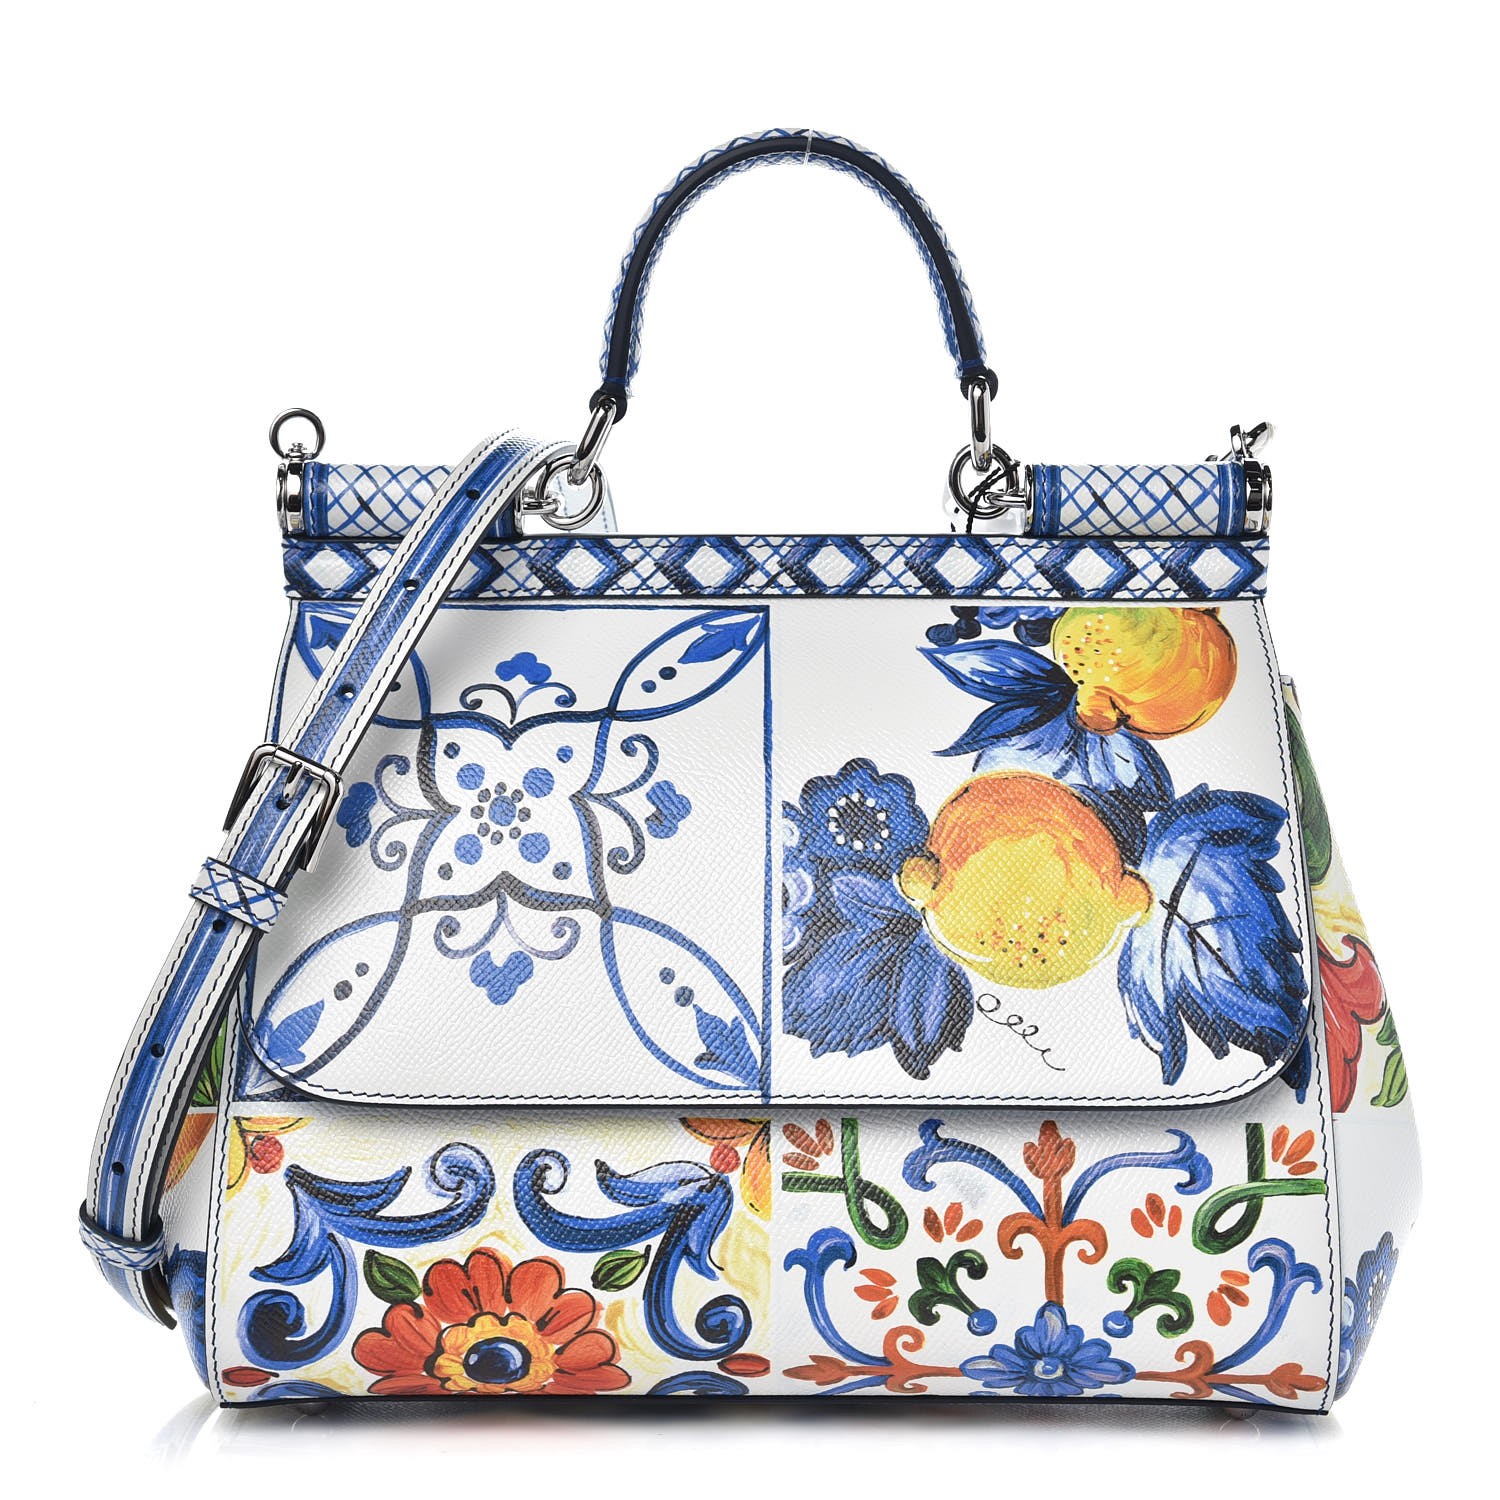 Why the most beautiful bag you’ve ever seen and why? : r ...